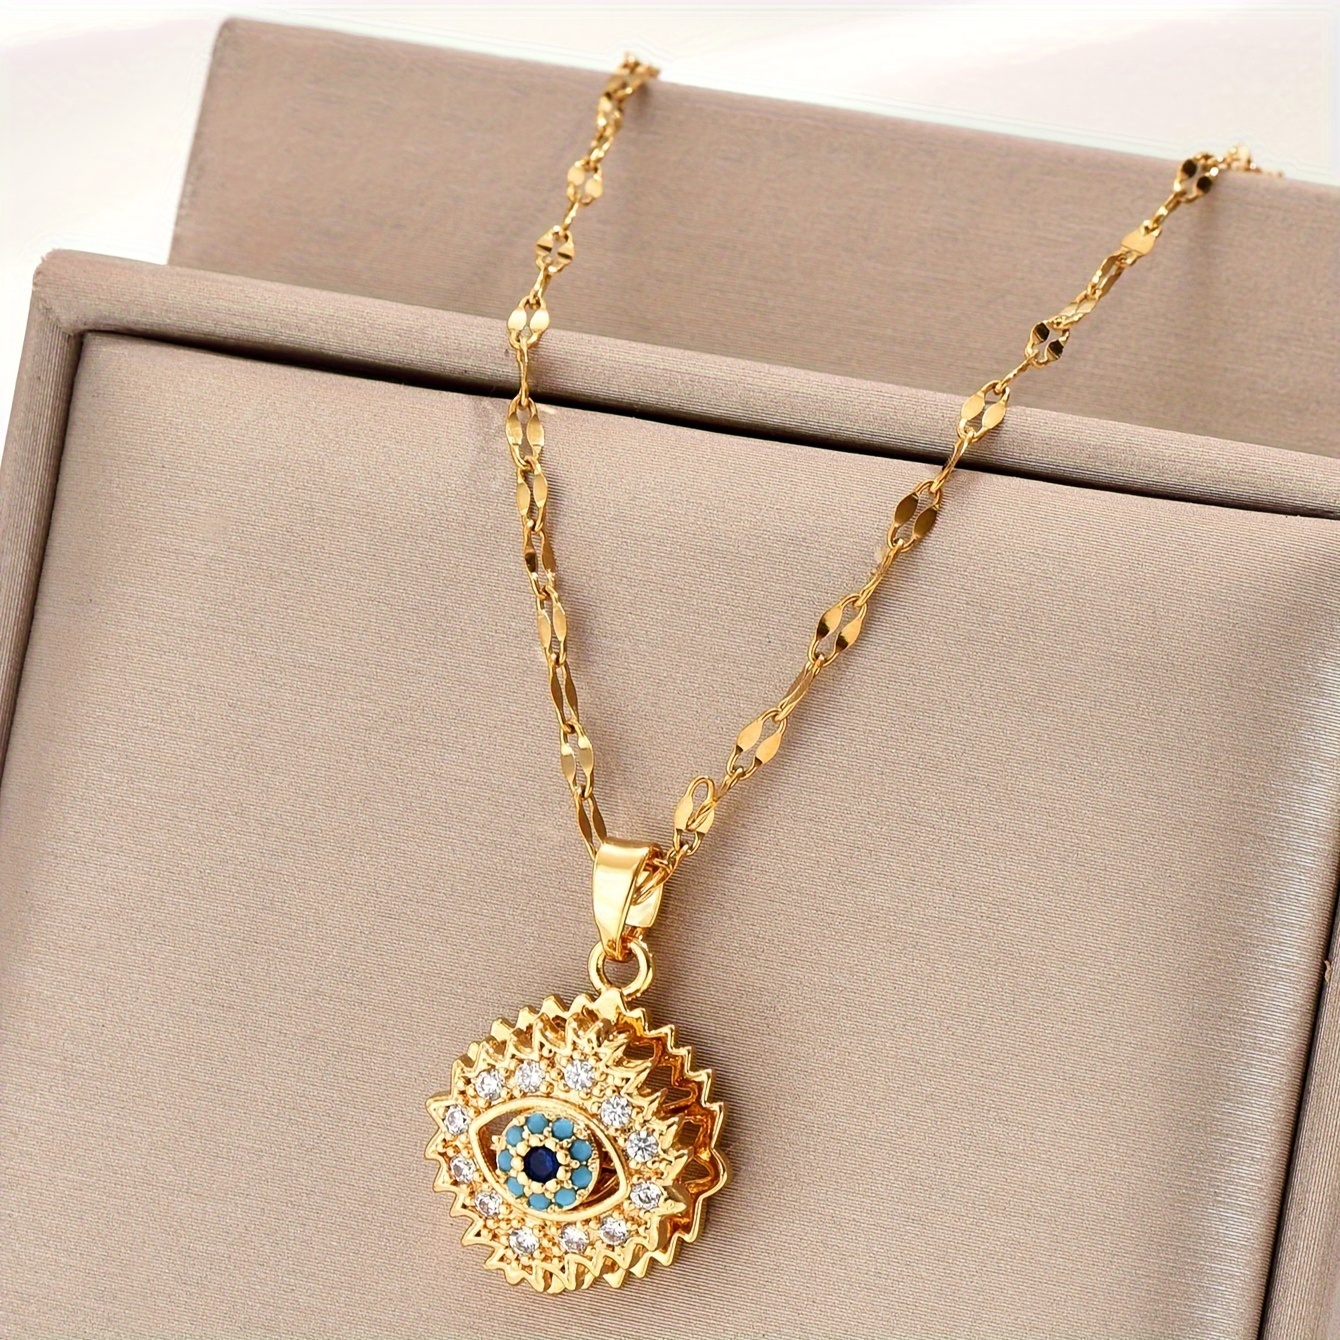 

1pc Golden Stainless Steel Chain Necklace, Cubic Zirconia Round Shape Blue Eye Pendant Necklace, Charm Fashion Trendy, Simple And Versatile For Men And Women